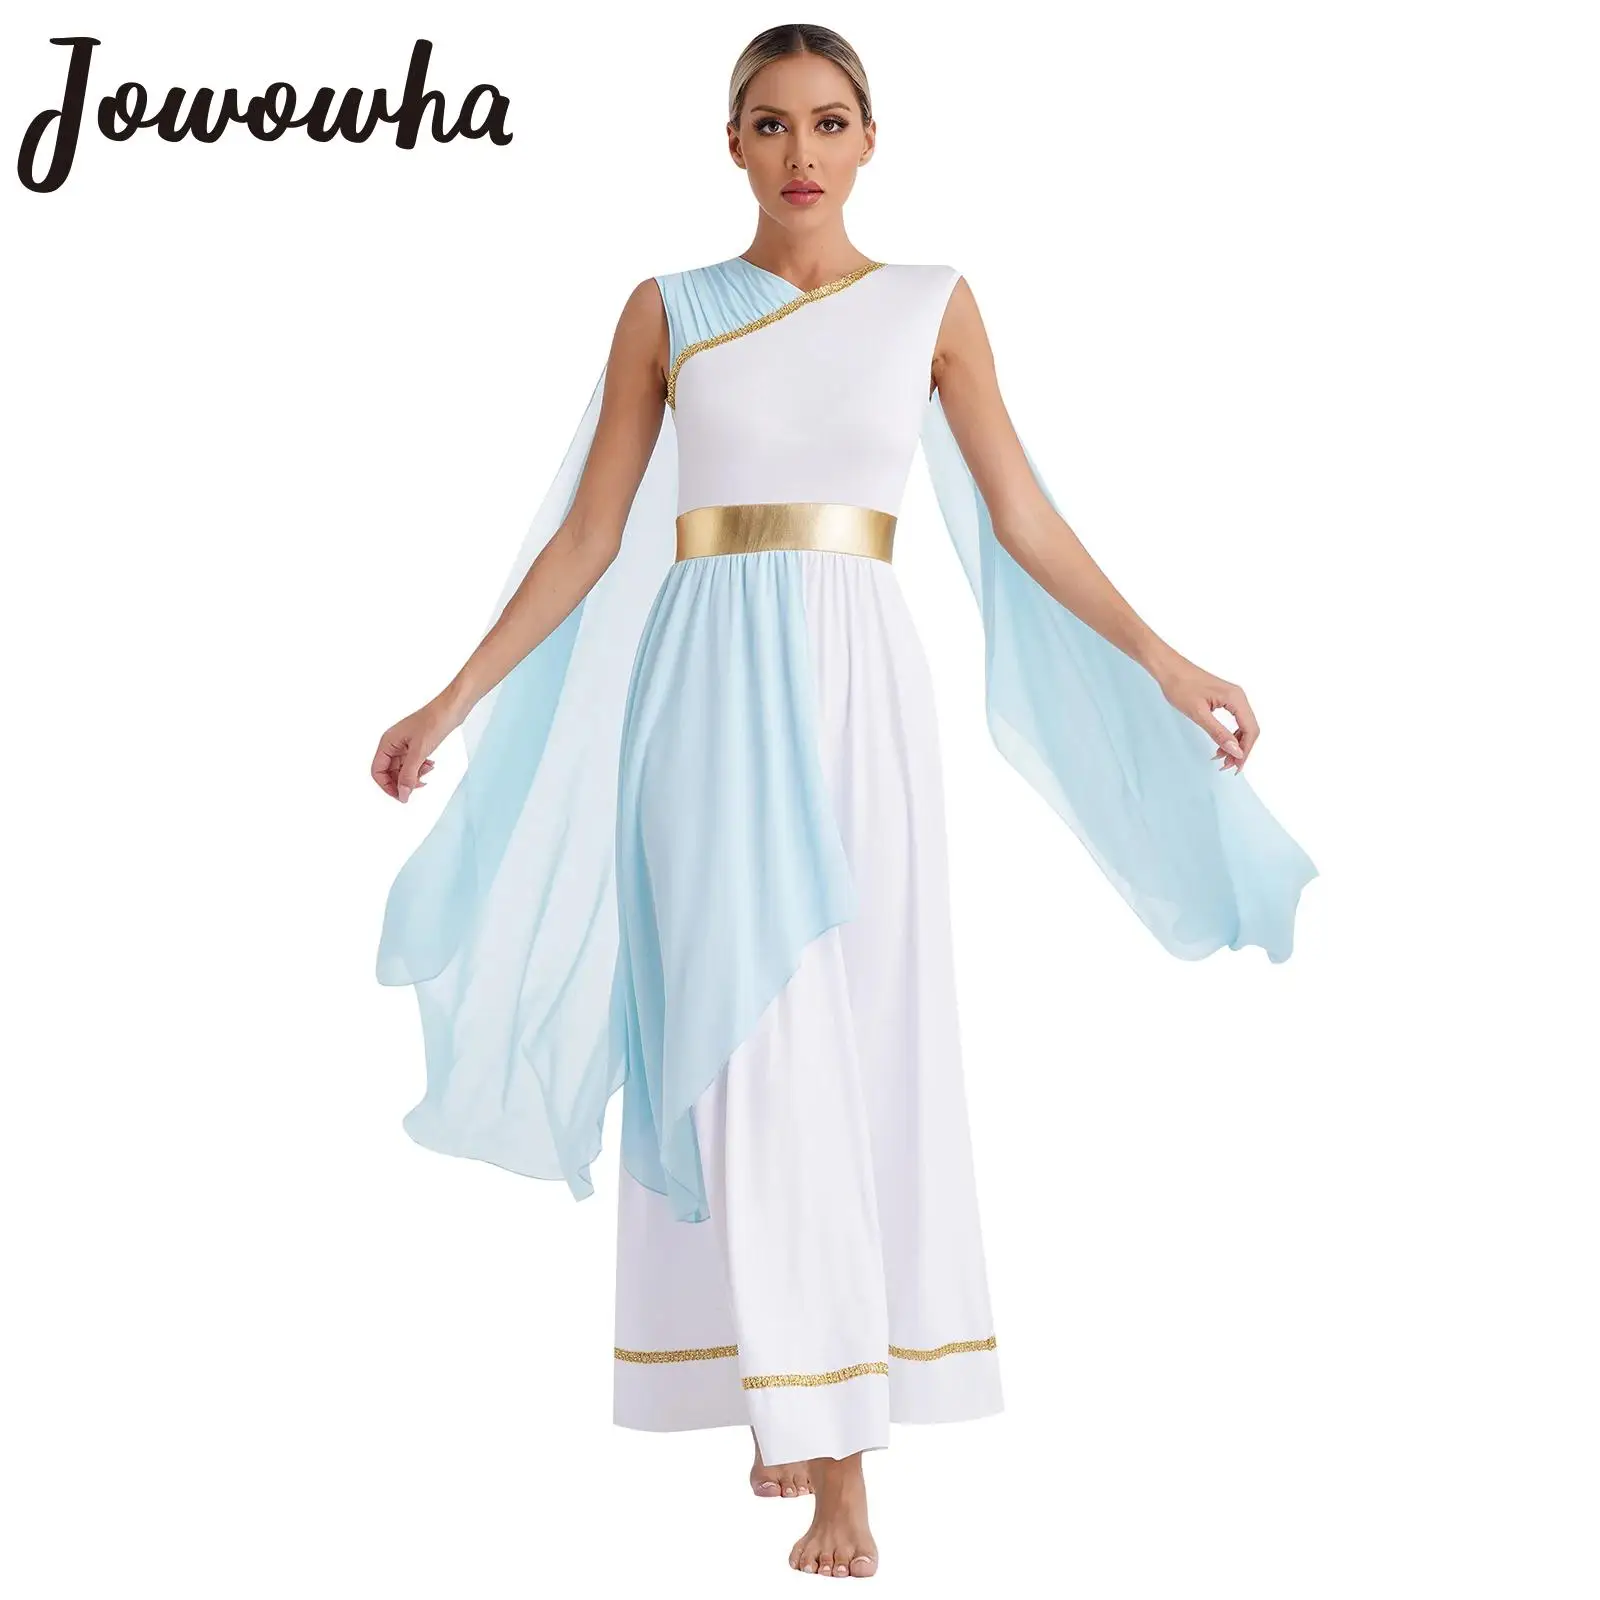 

Womens Ancient Greek Roman Princess Queen Cosplay Costume Chiffon Gold Trims Toga Dress Carnival Theme Party Role Play Dress Up